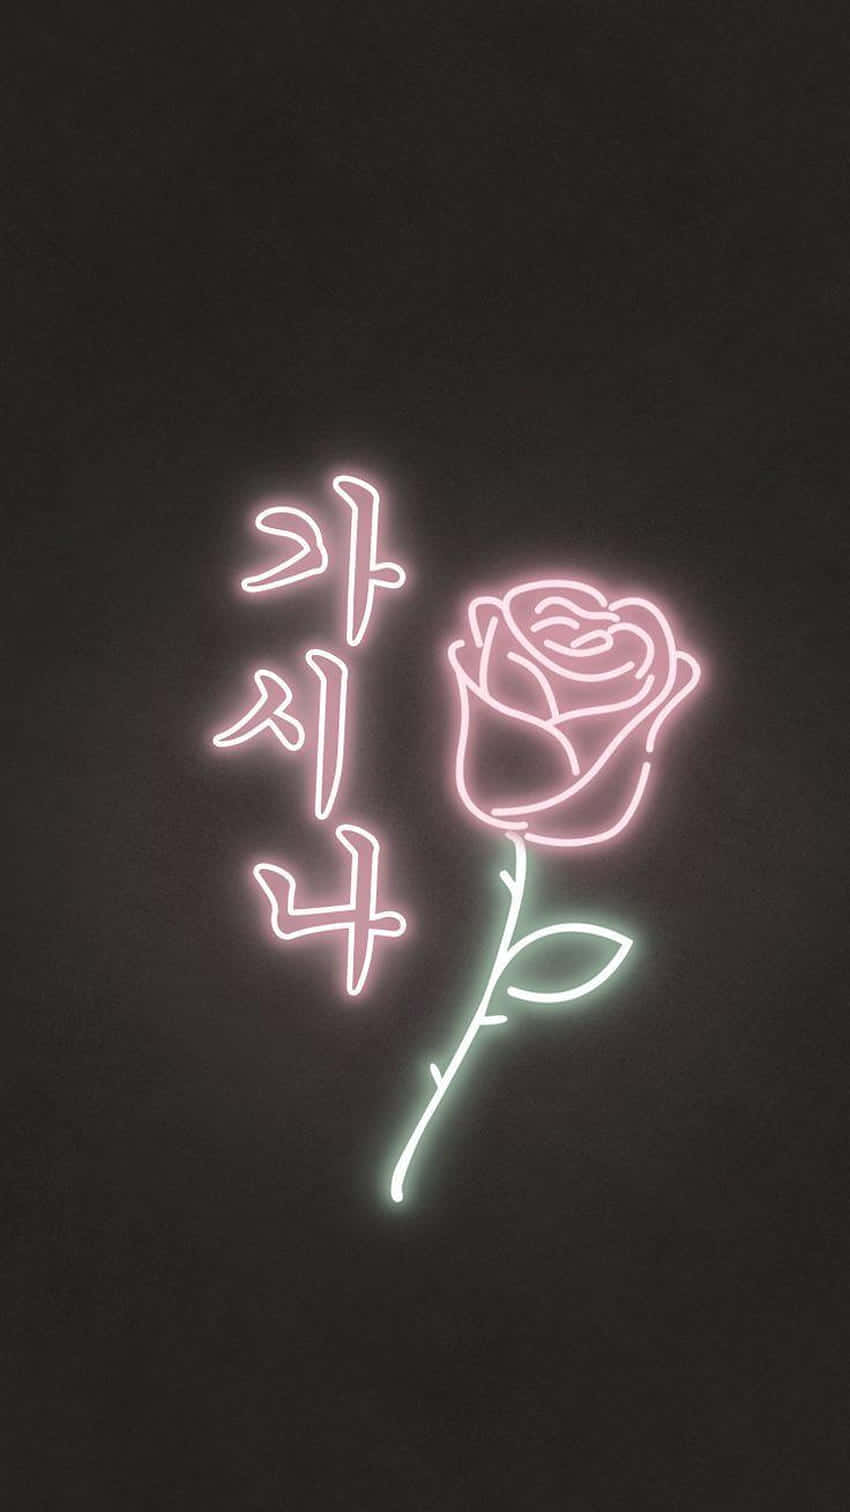 Aesthetic wallpaper with neon rose and Korean characters on a black background - Neon